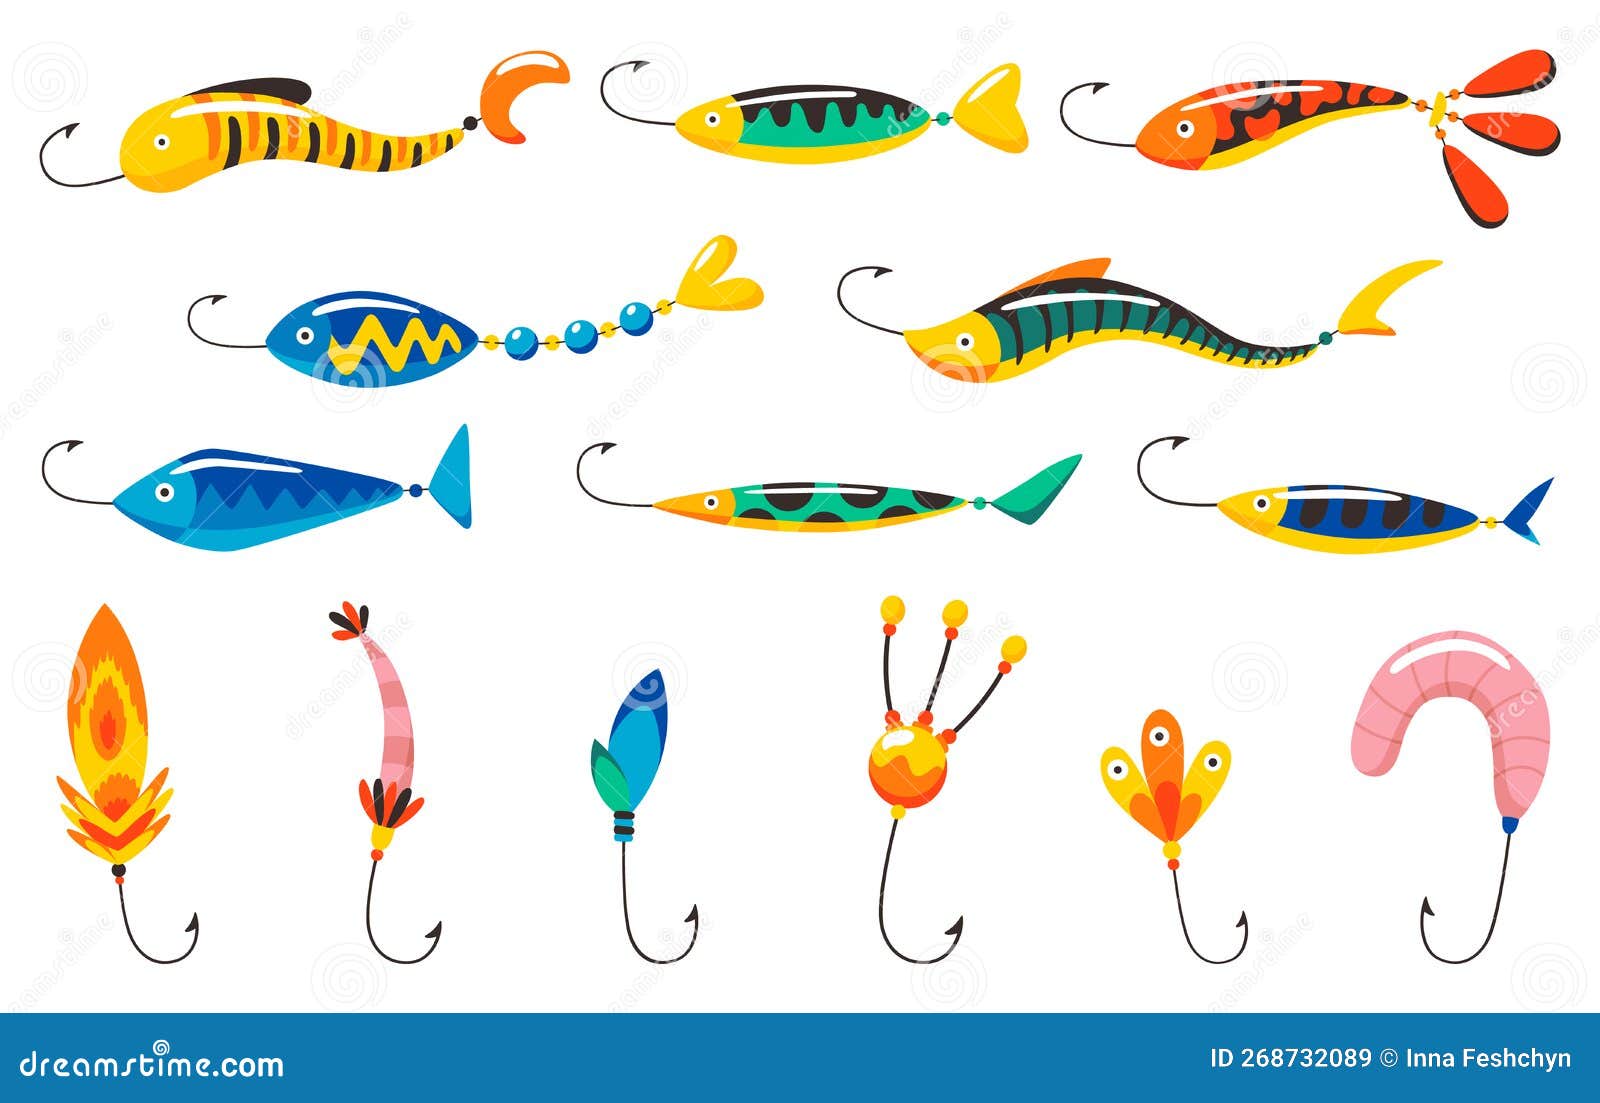 Fishing Bait Icon Set. Fish Lure with Hook Isolated on White Background  Stock Vector - Illustration of design, fisherman: 268732089